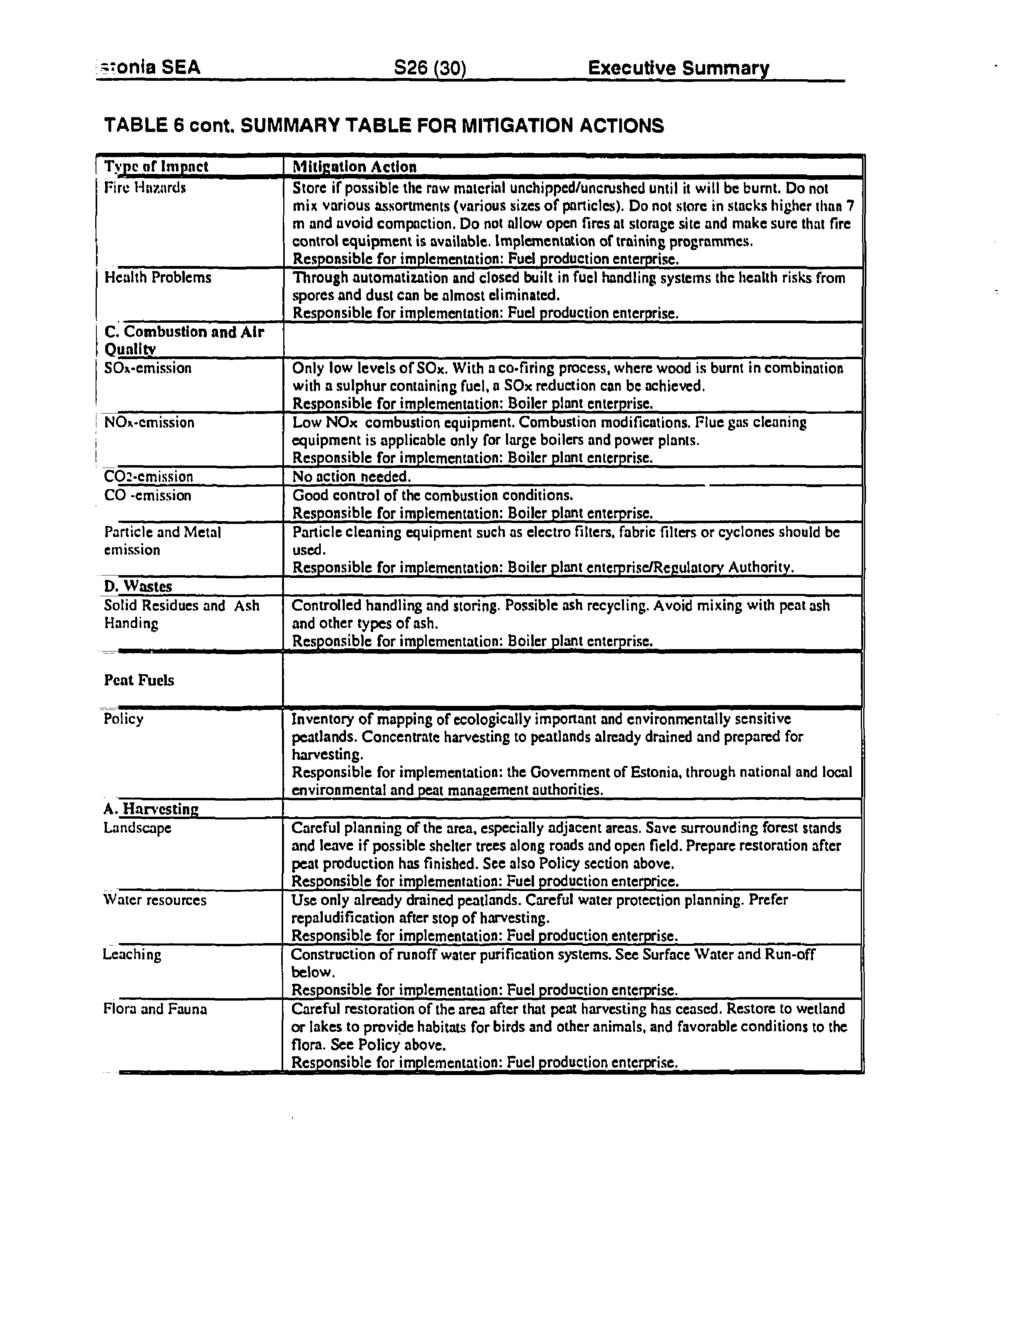 -- onia SEA S26 (30) Executive Summary TABLE 6 cont. SUMMARY TABLE FOR MITIGATION ACTIONS Type or Impact Fire Hazards Hcalth Problems C.